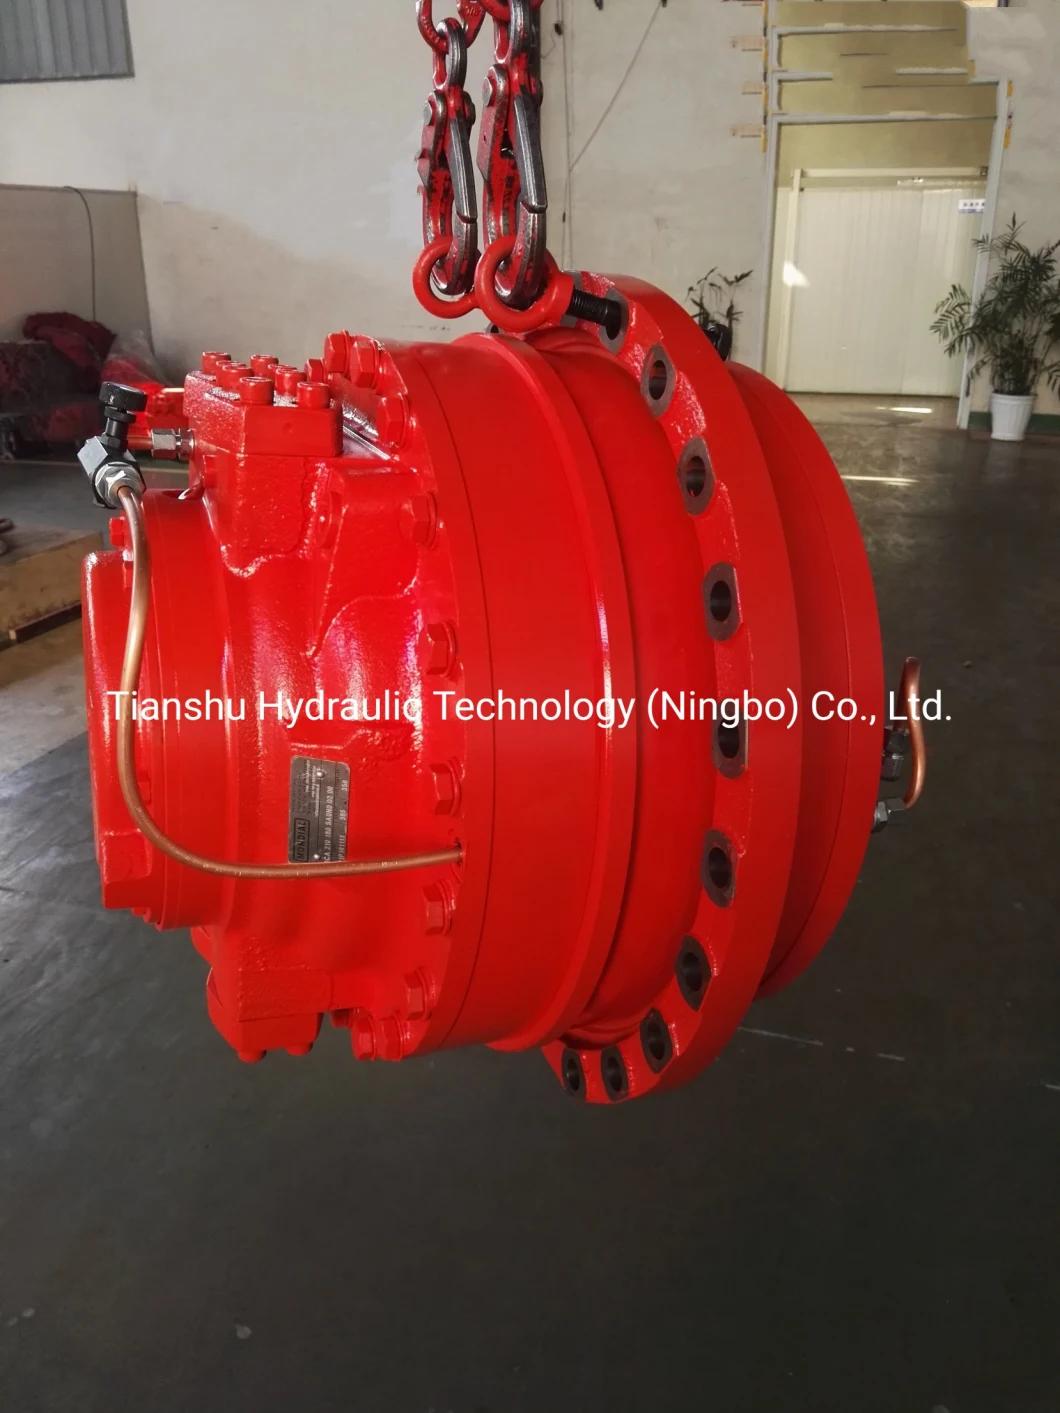 Tianshu Produce Good Quality Hydraulic Motor Replace Rexroth Hagglunds Radial Piston Low Speed Large Torque Hydraulic Motor Ship to Poland.